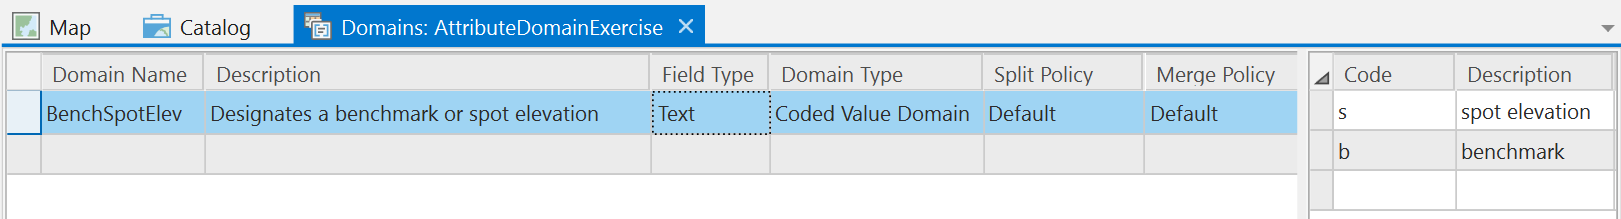 Screen capture of the Domains tab showing configuration of the BenchSpotElev coded value domain as described above